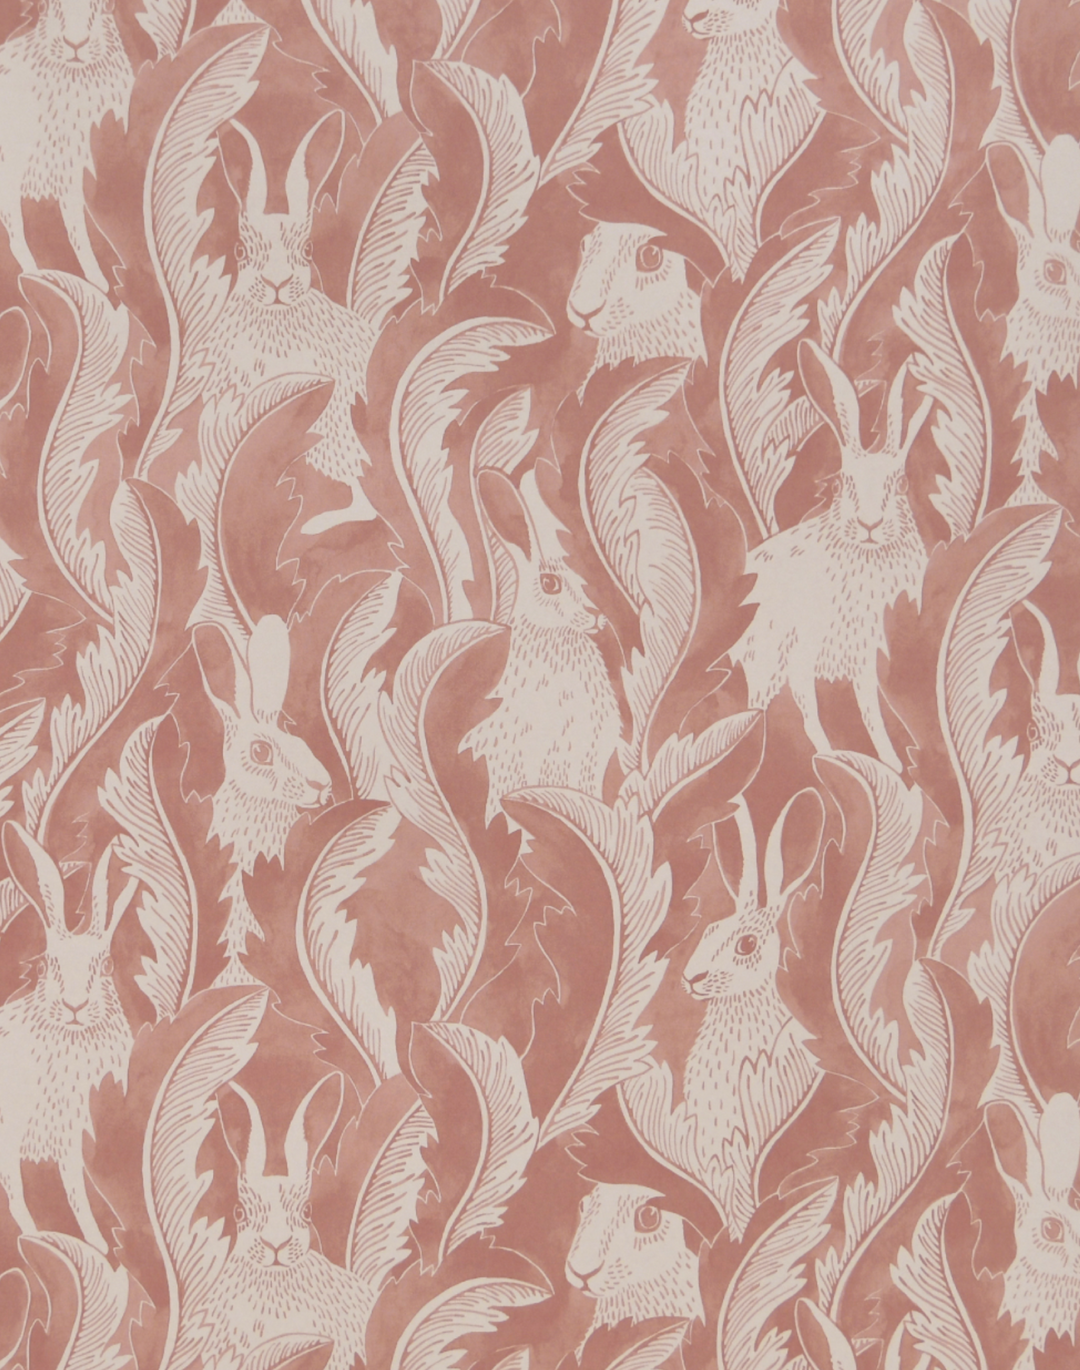 Hares in Hiding, Dusty Pink